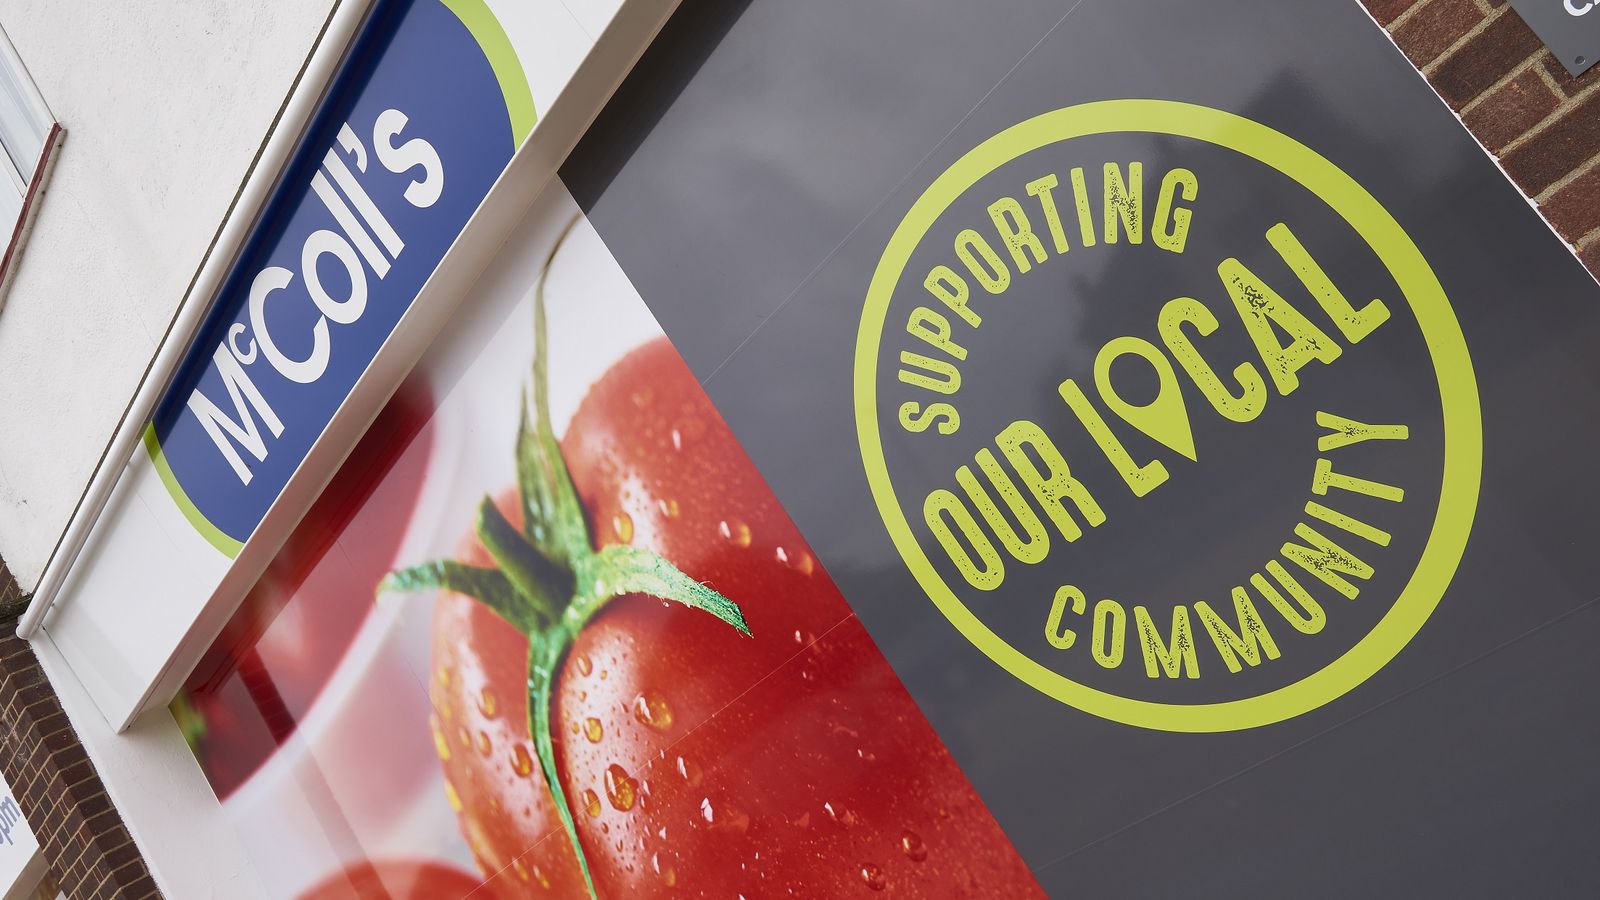 Over 1,000 McColl's jobs at risk of redundancy following Morrisons takeover